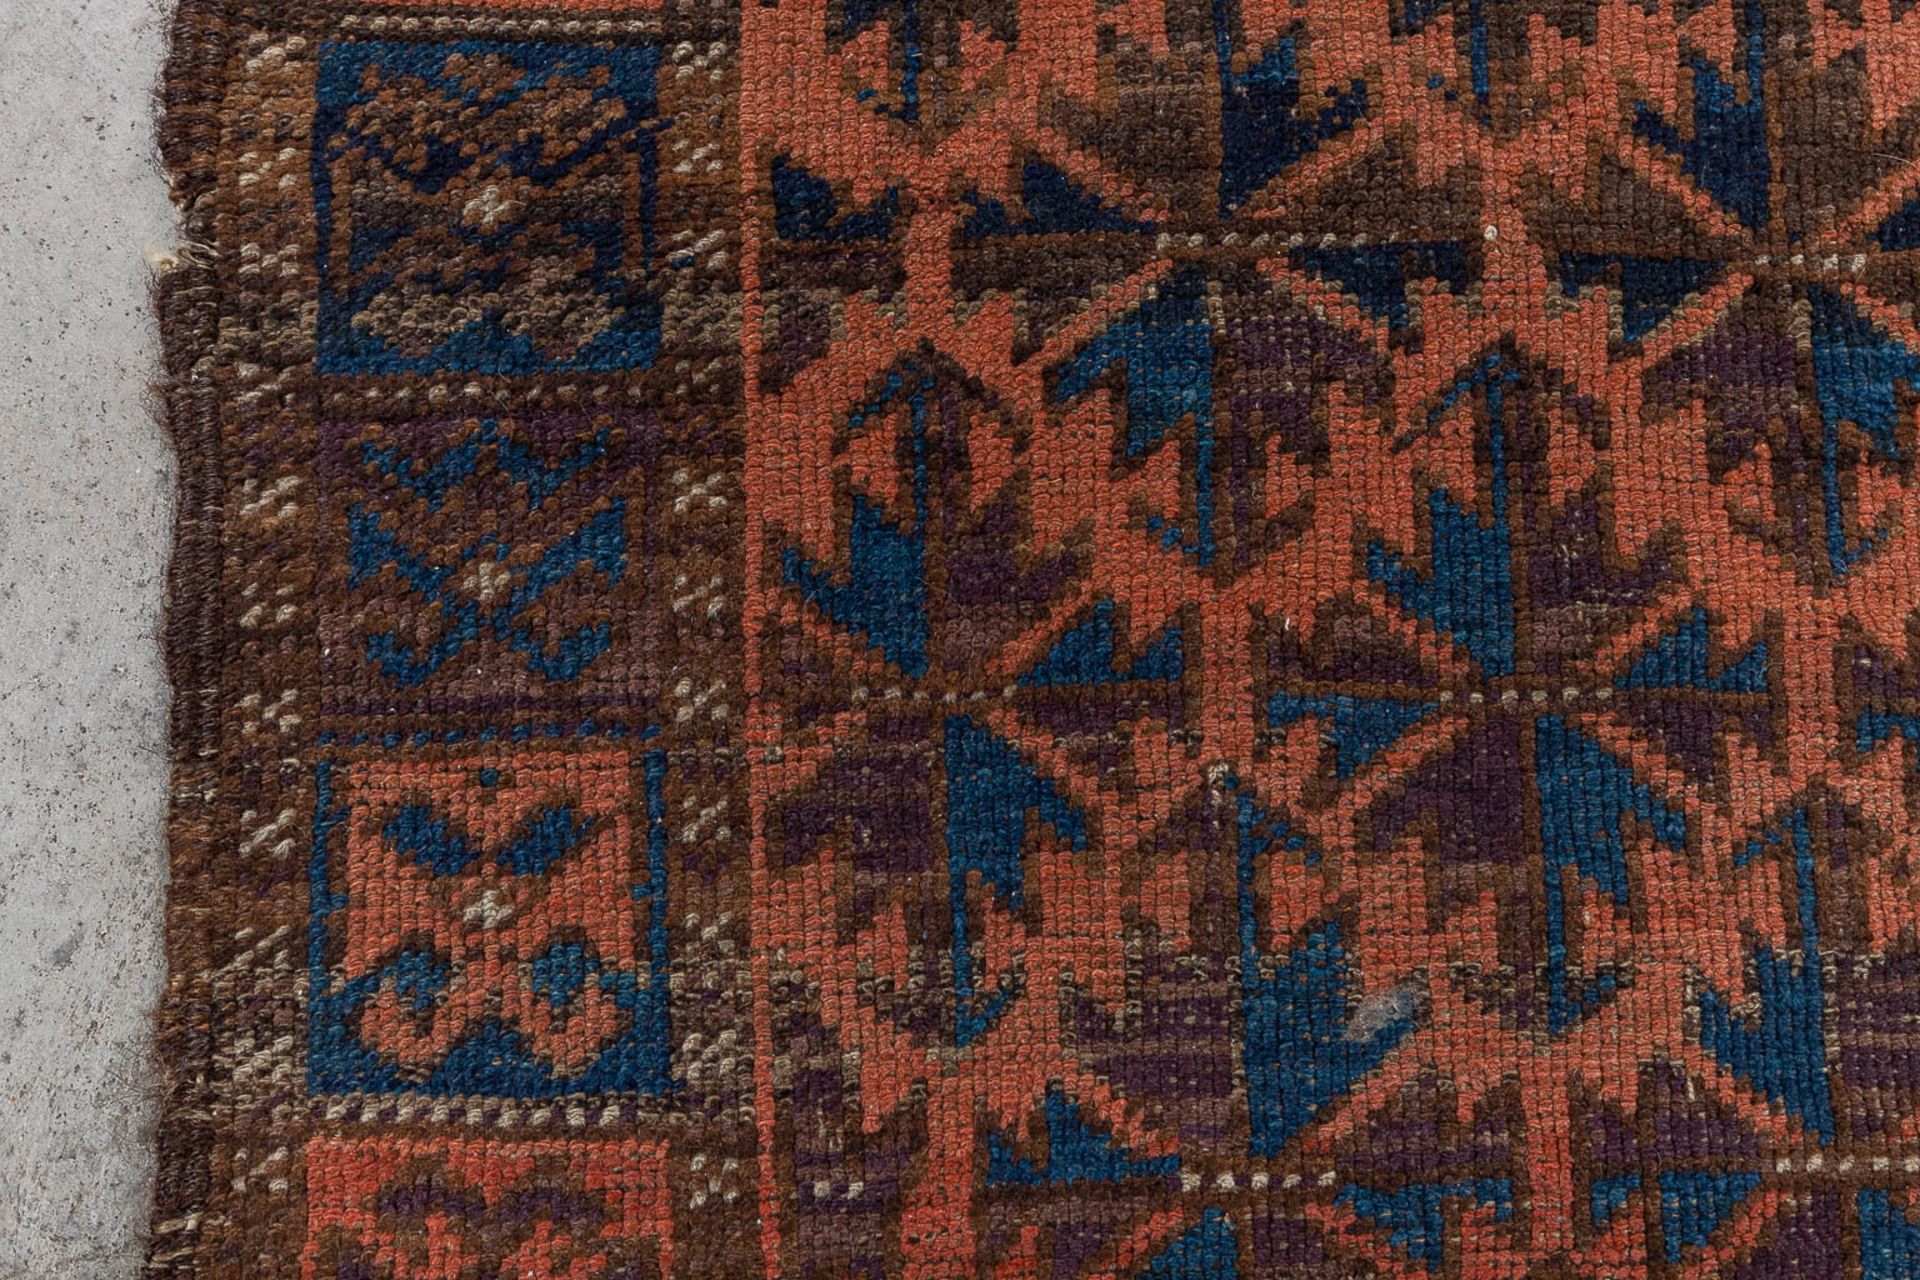 A collection of 3 Oriental hand-made carpets, probably Caucasian. (L: 157 x W: 116 cm) - Image 6 of 11